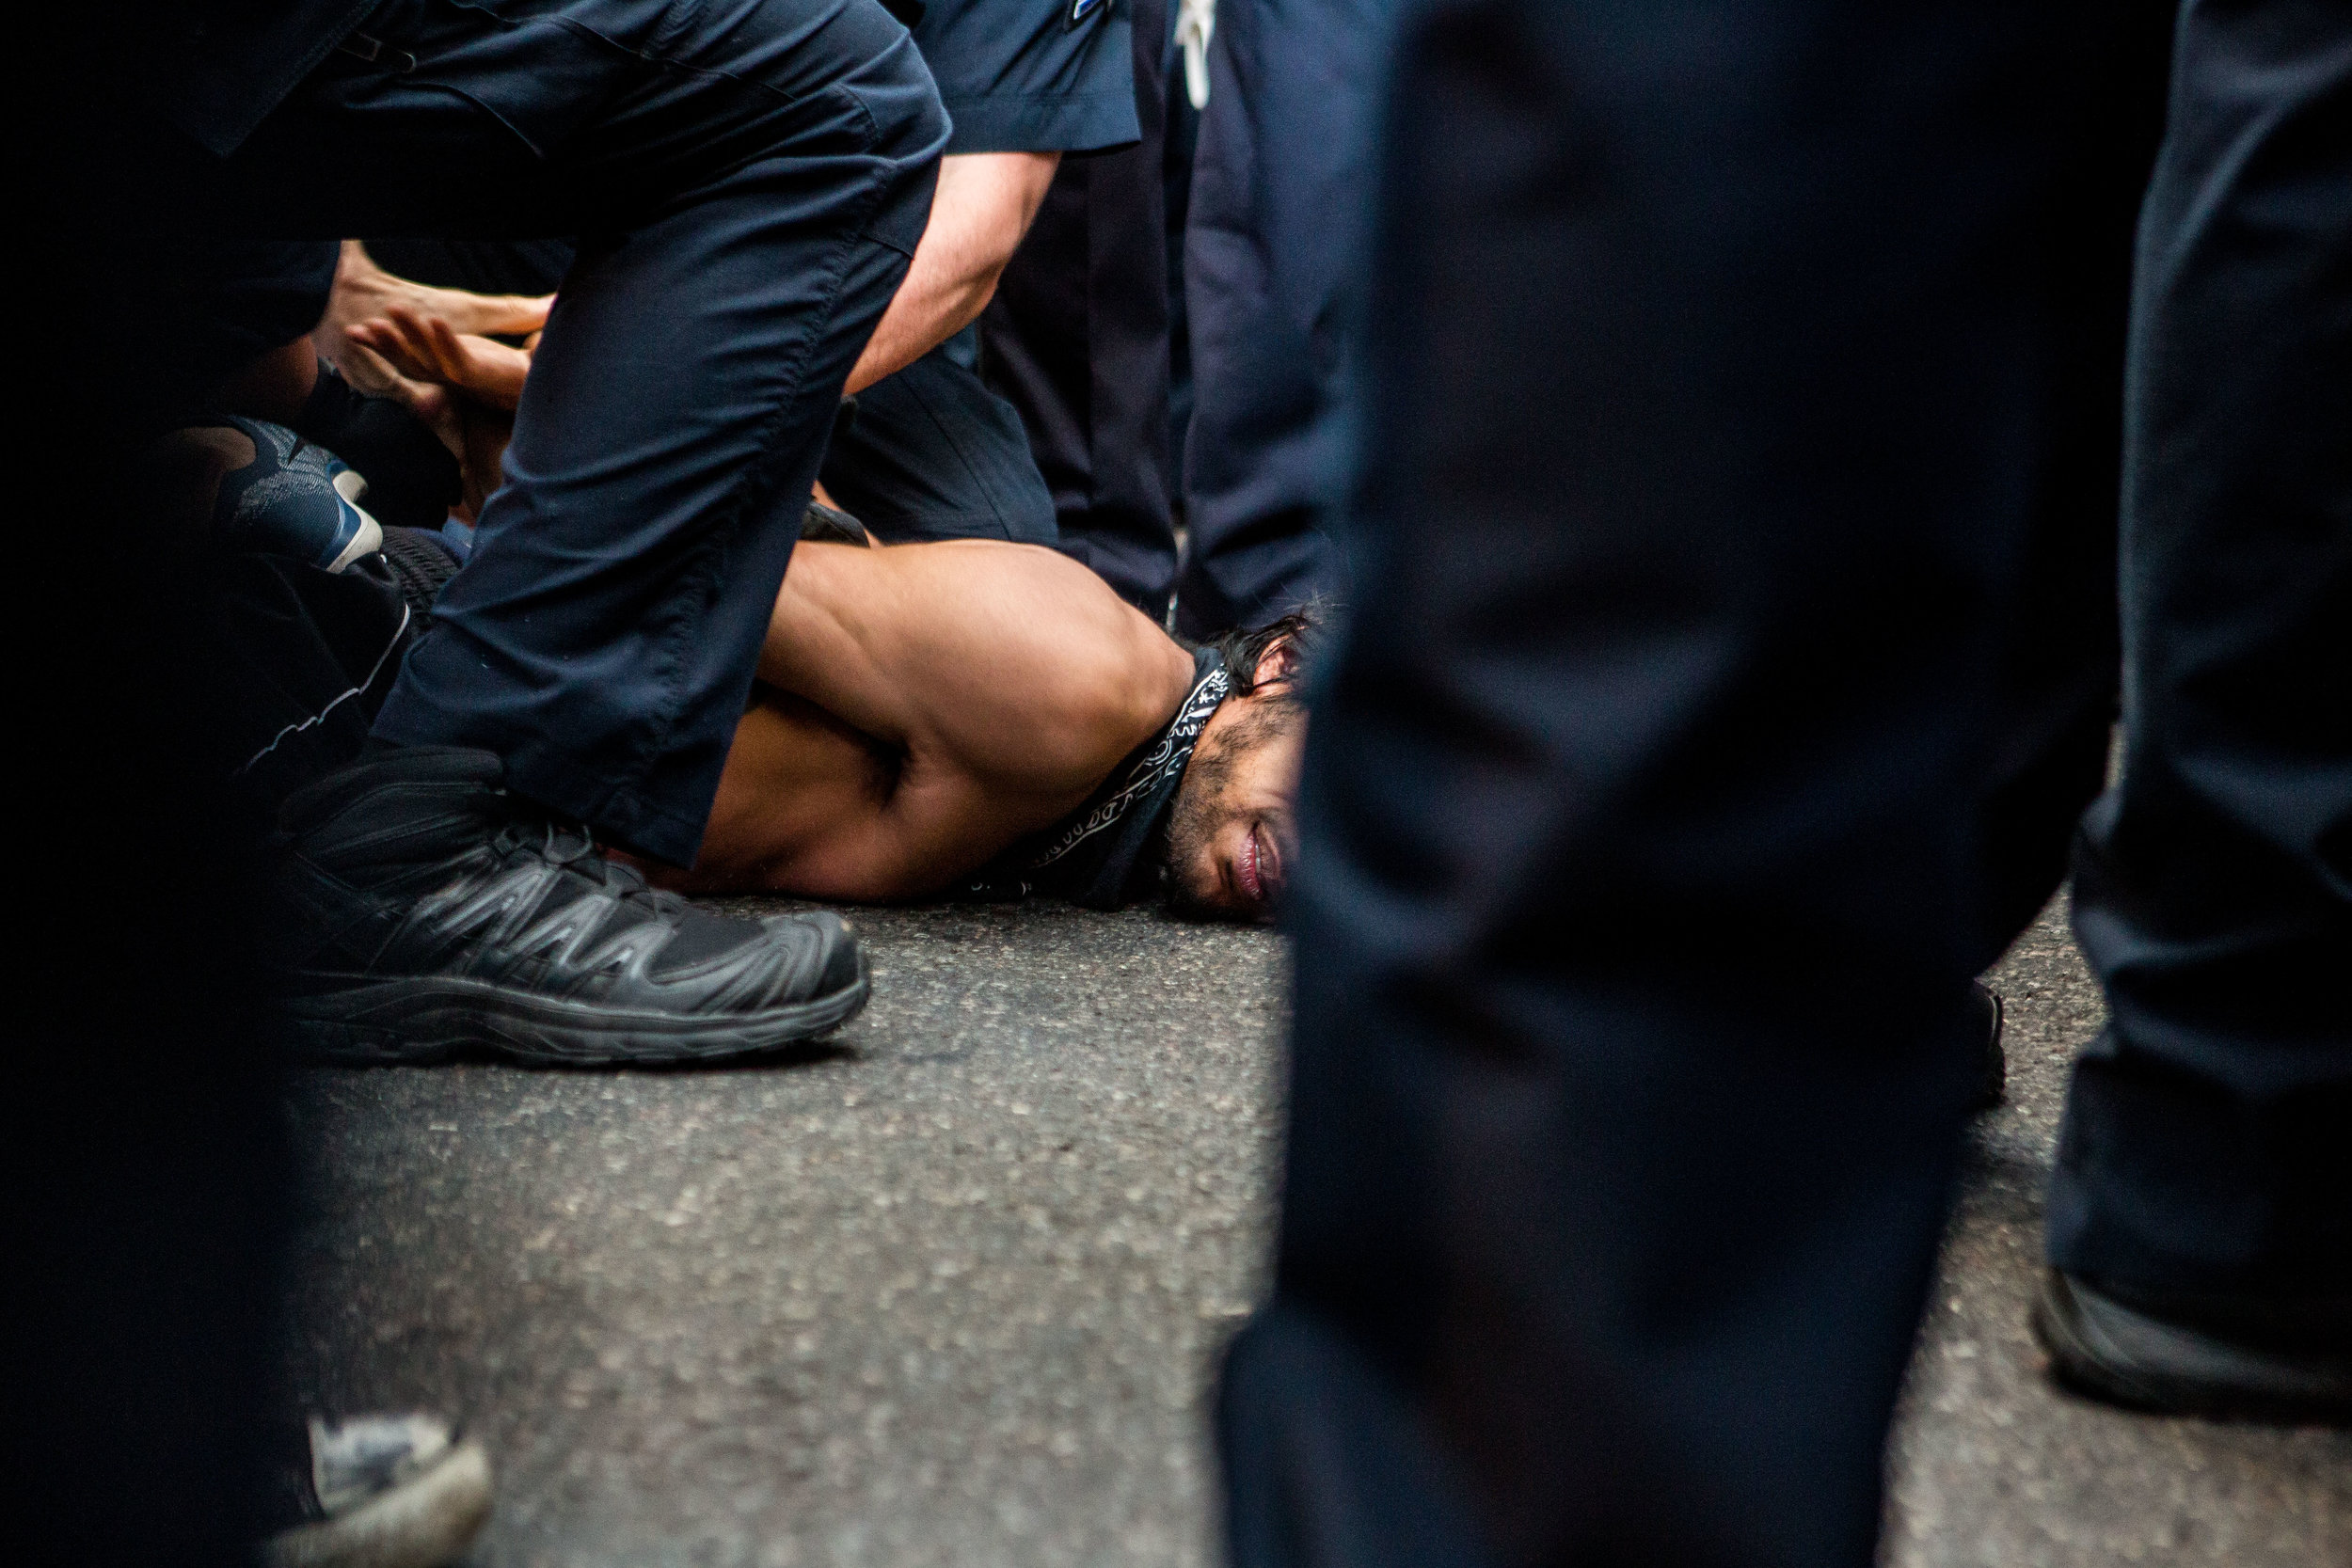  A Black Lives Matter demonstrator is forced to the street and handcuffed in Manhattan, 2016. 